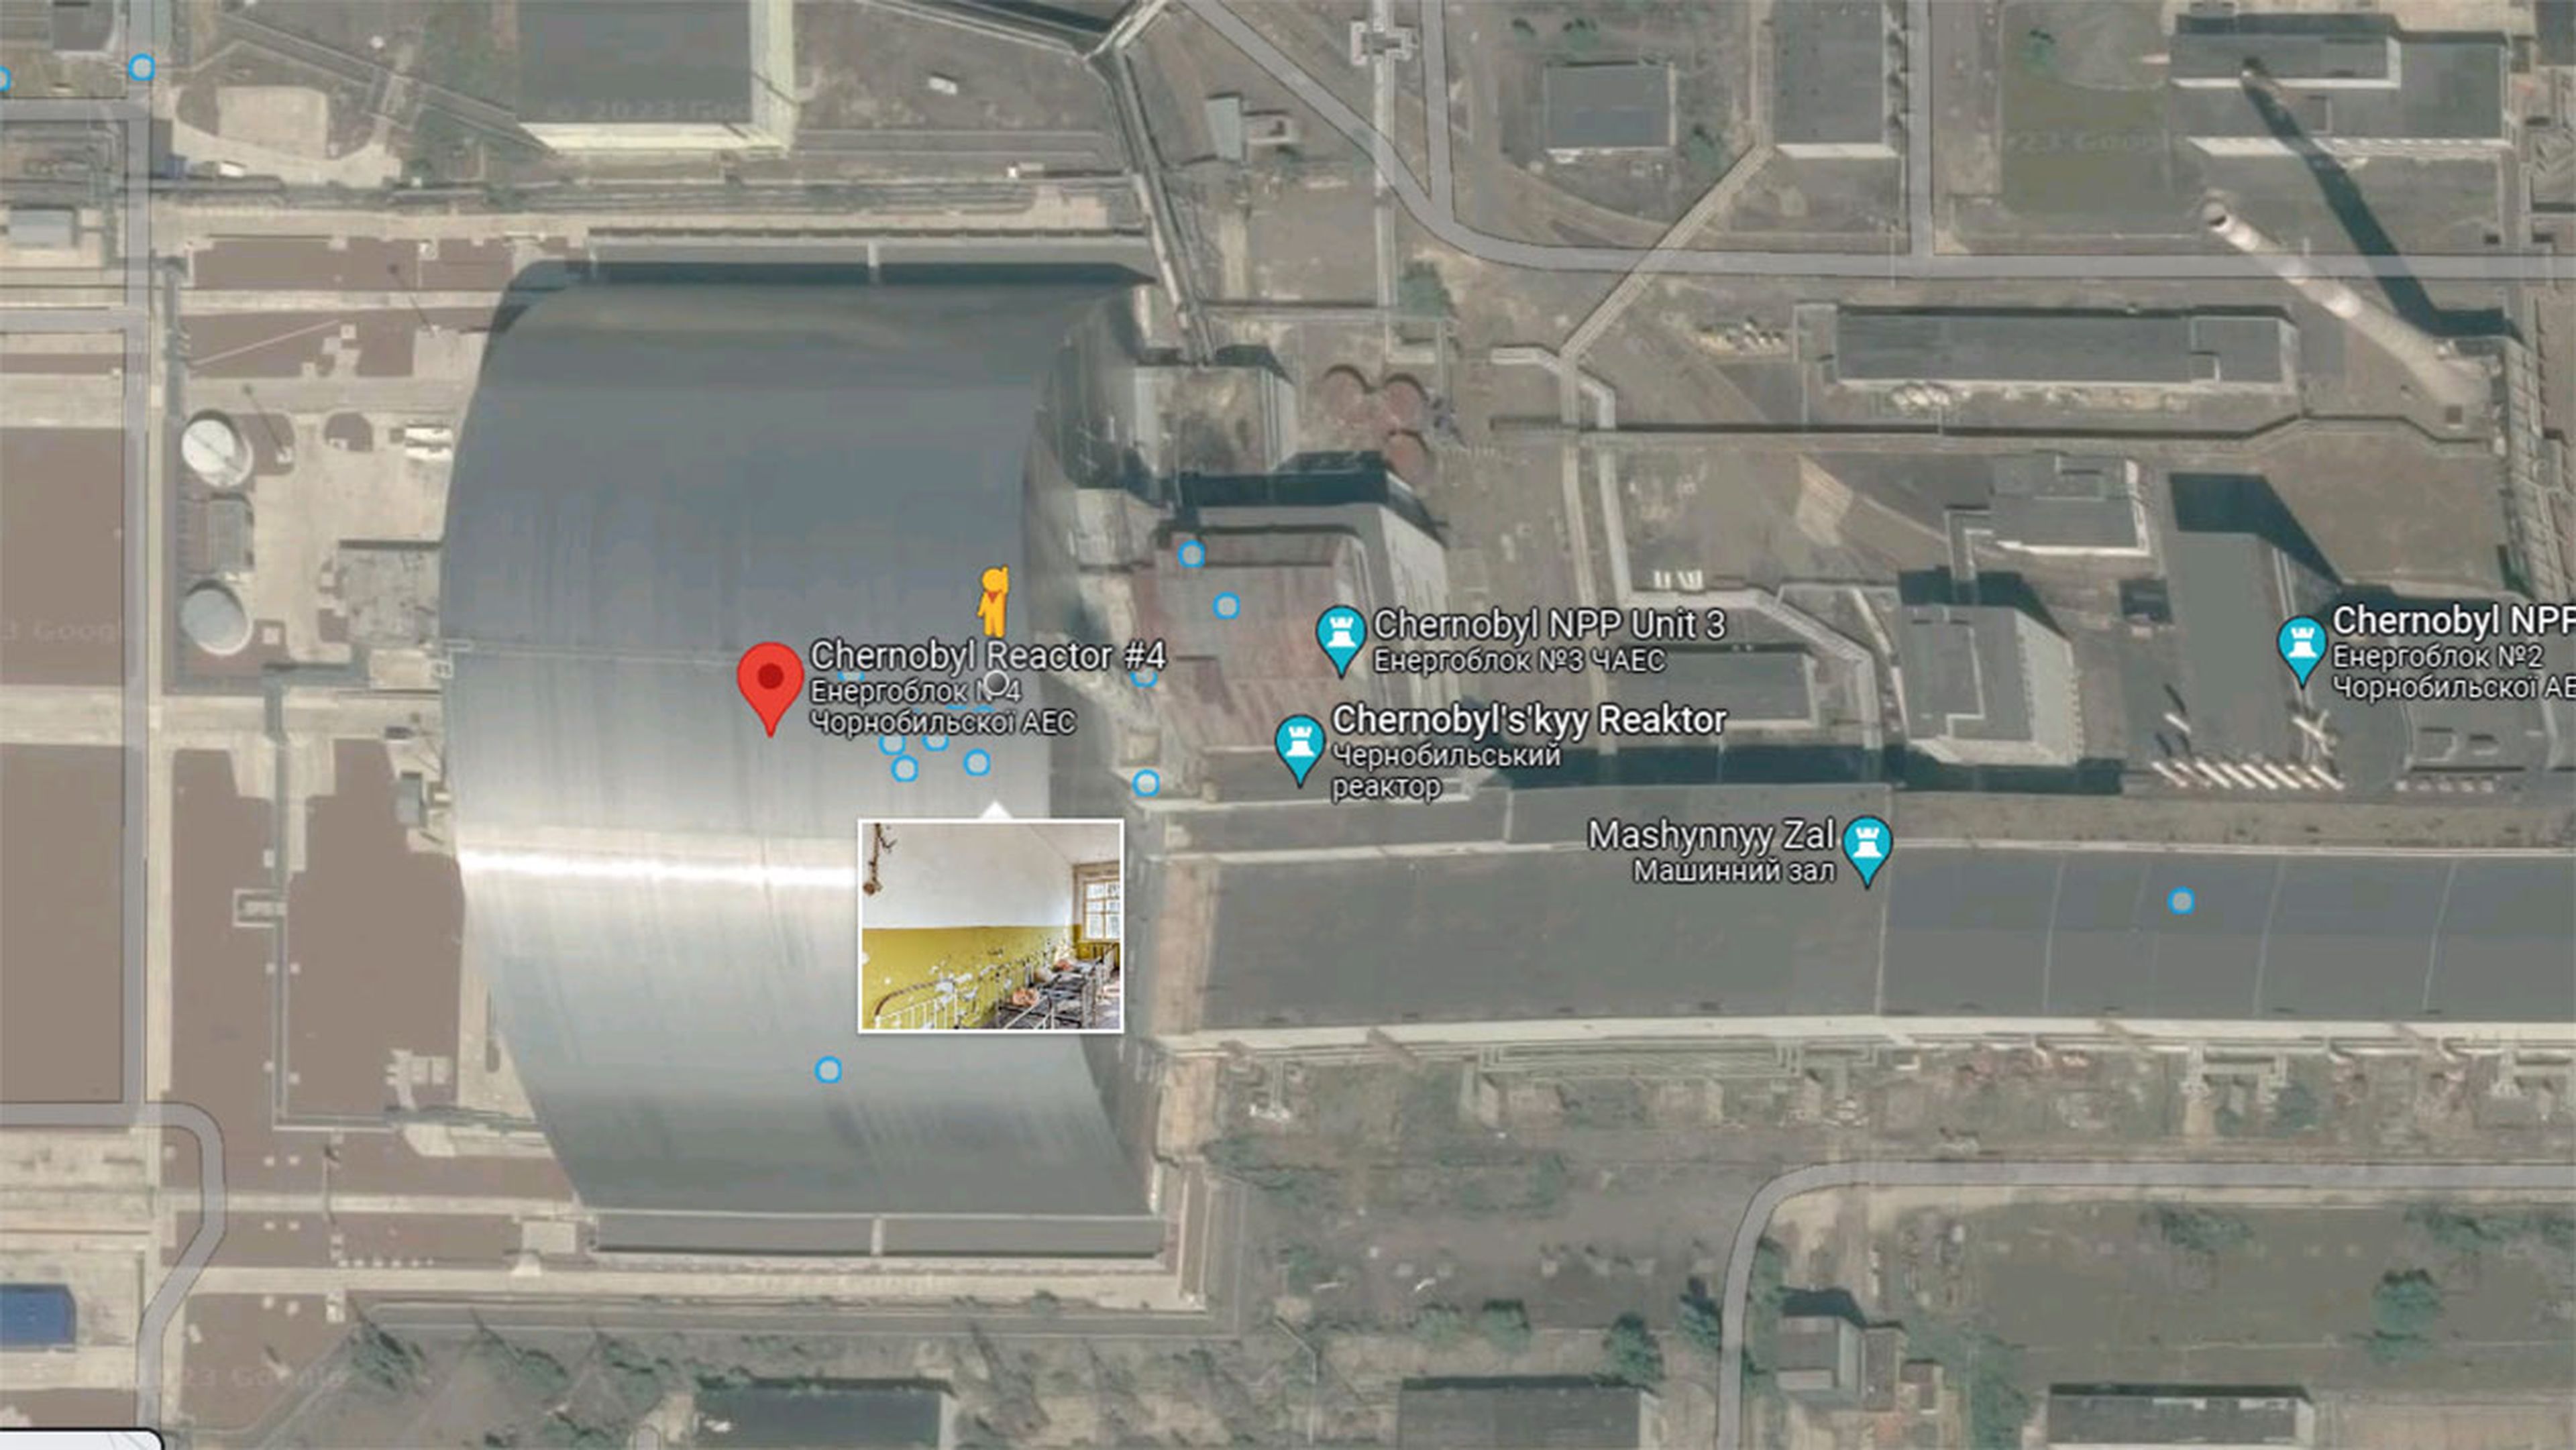 Google Maps allows you to visit the interior of Chernobyl and it is chilling